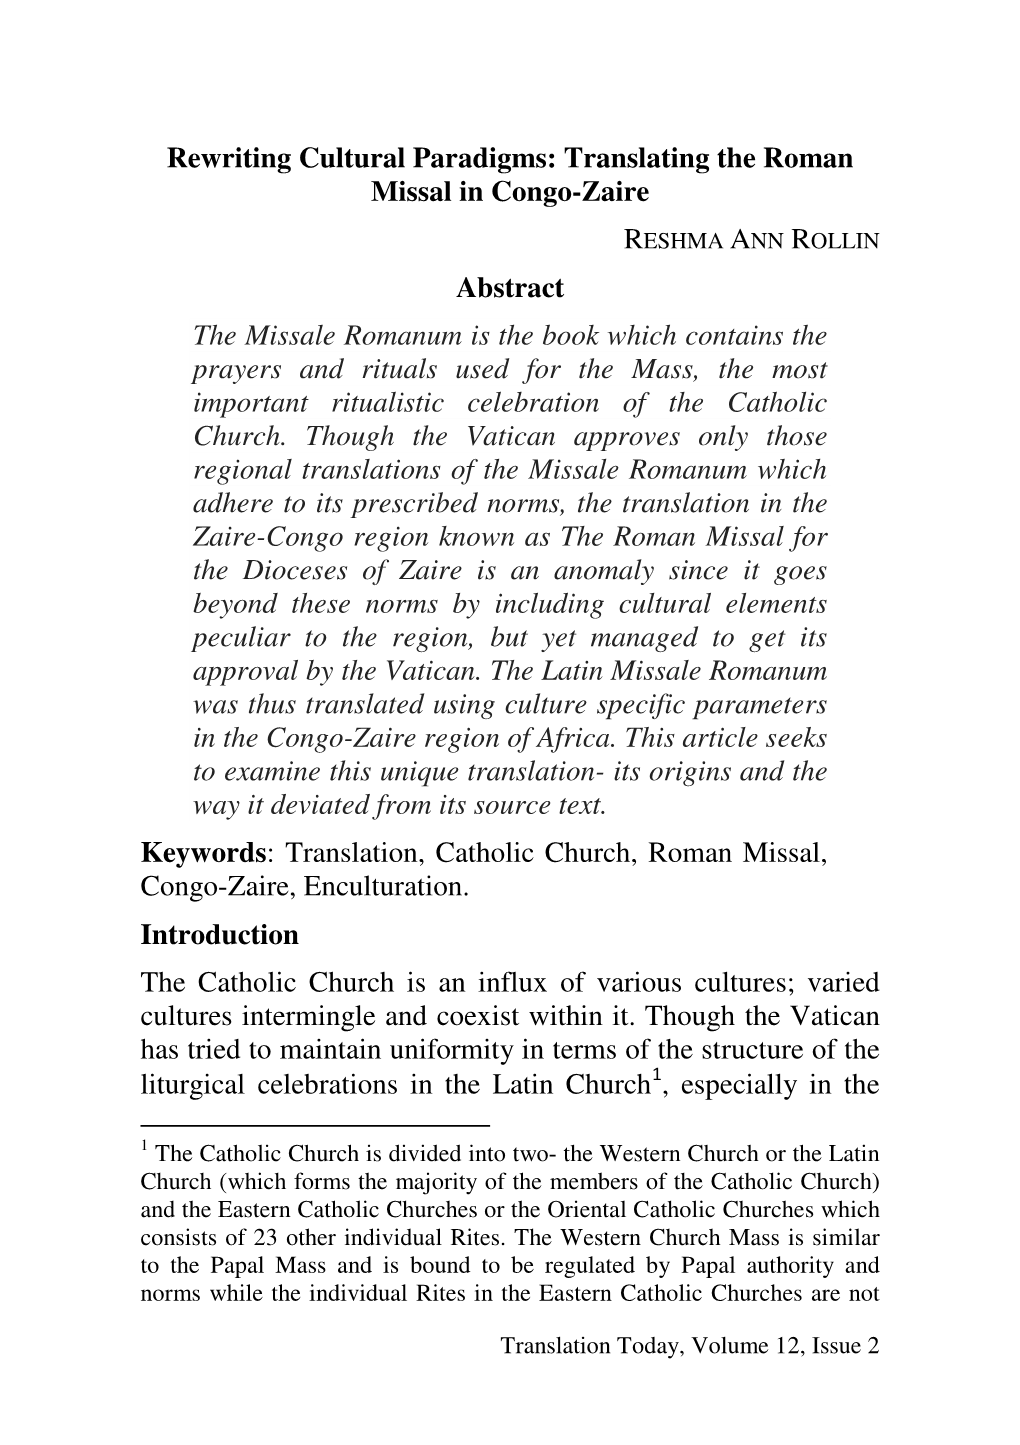 Rewriting Cultural Paradigms: Translating the Roman Missal In